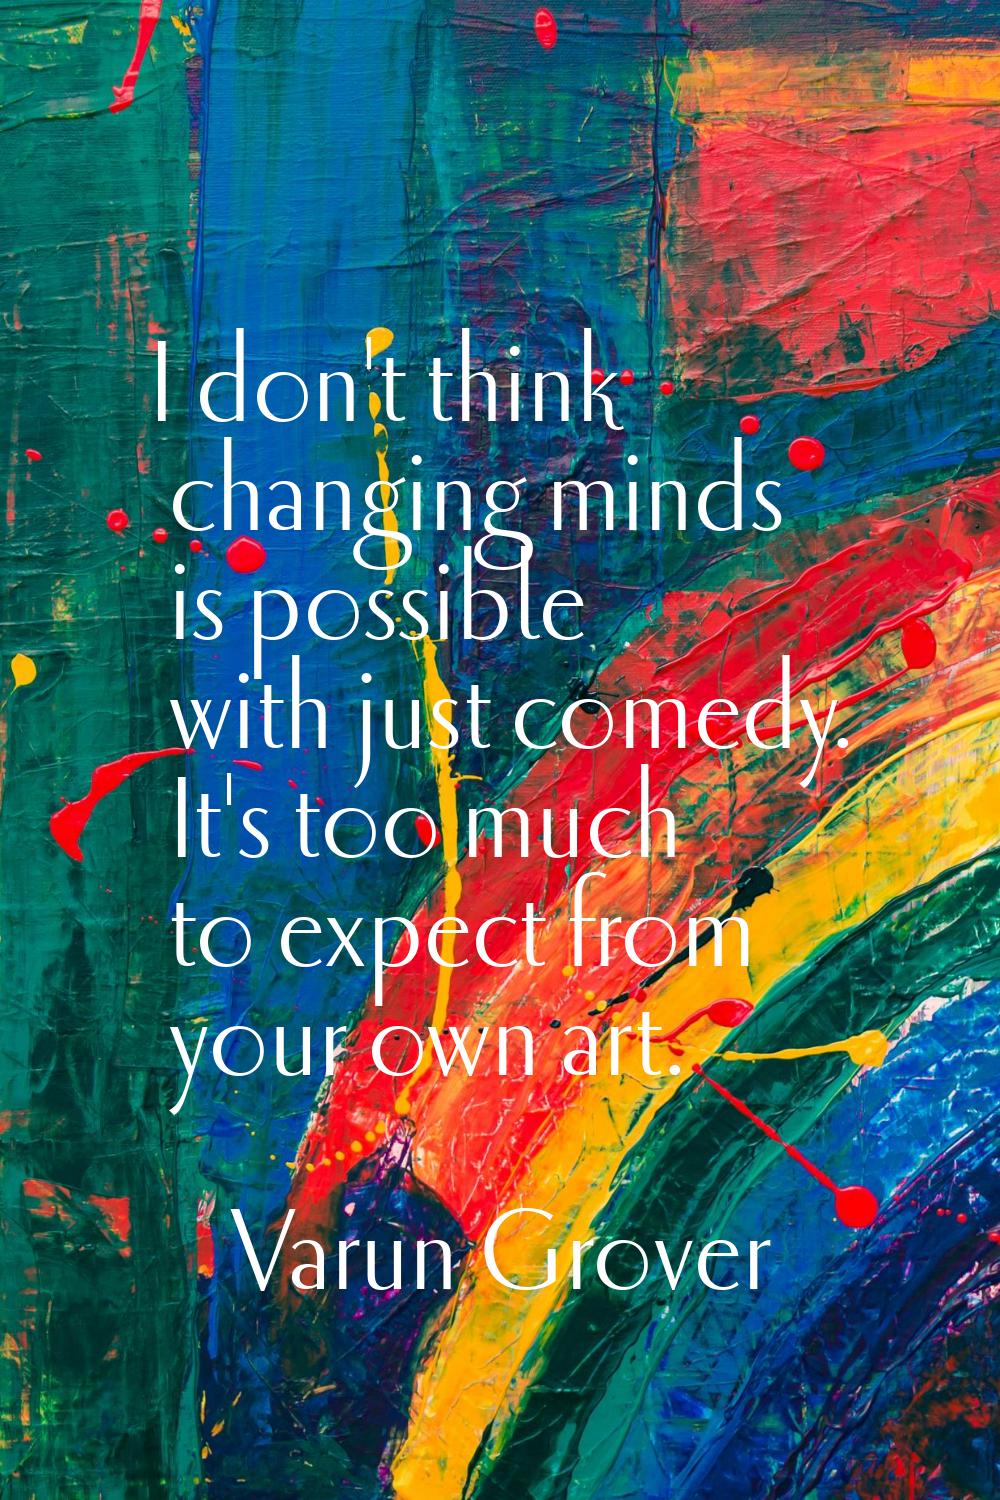 I don't think changing minds is possible with just comedy. It's too much to expect from your own ar